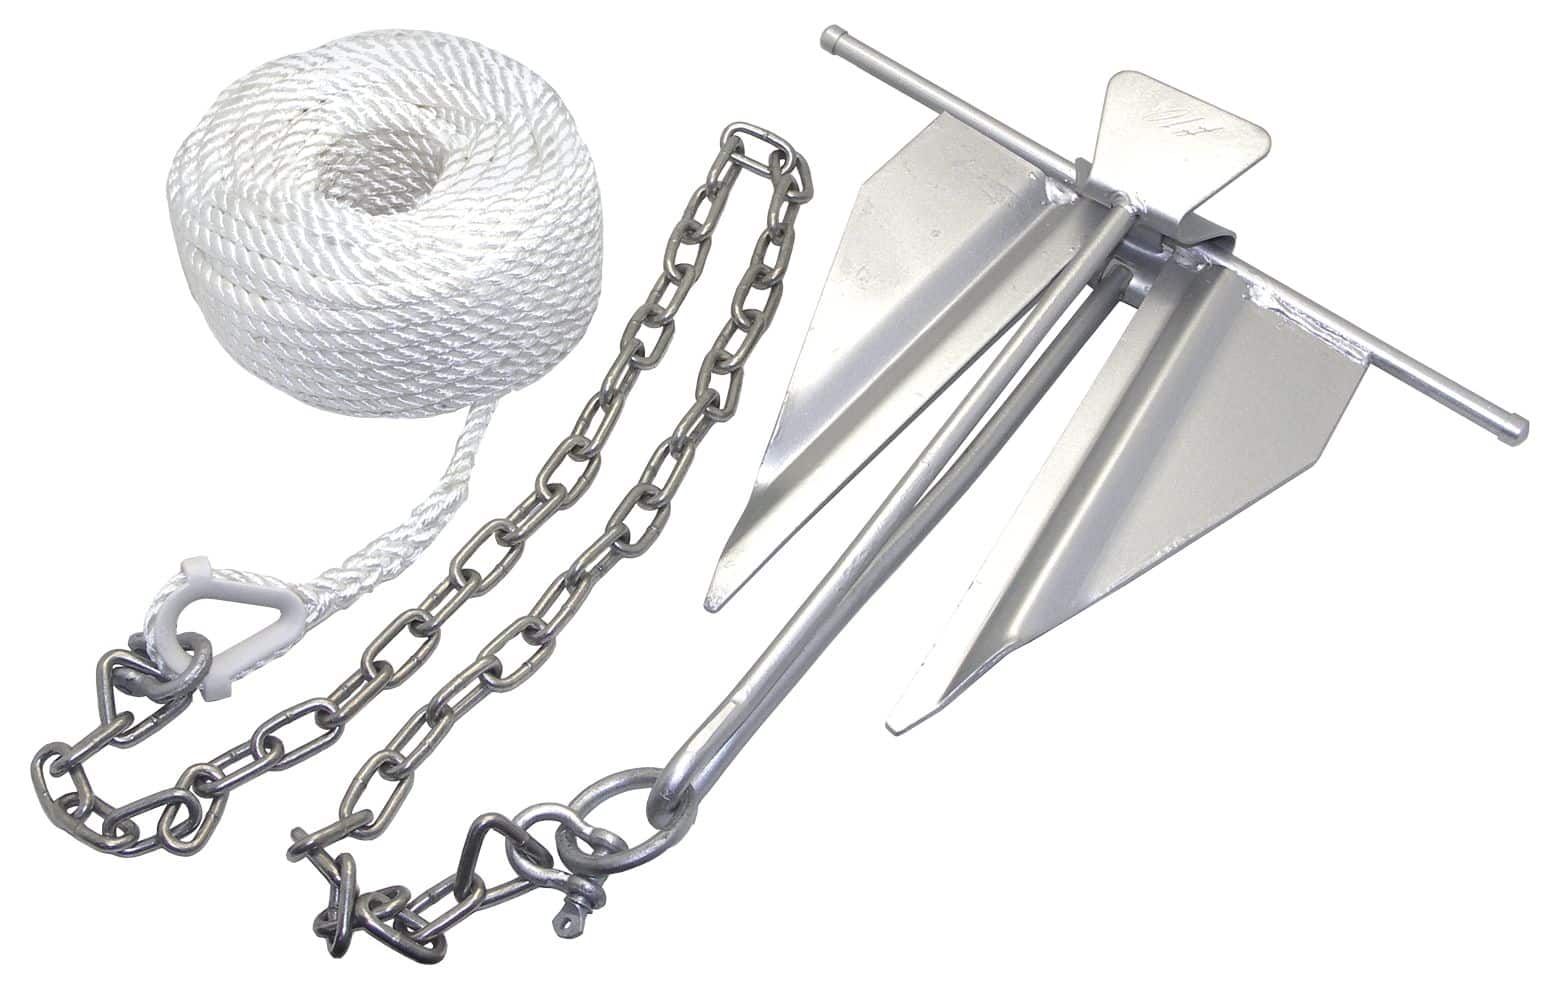 Leopard Galvanized Slip Ring #7 Anchor Kit, Includes Chain & Rope 5-lb ...